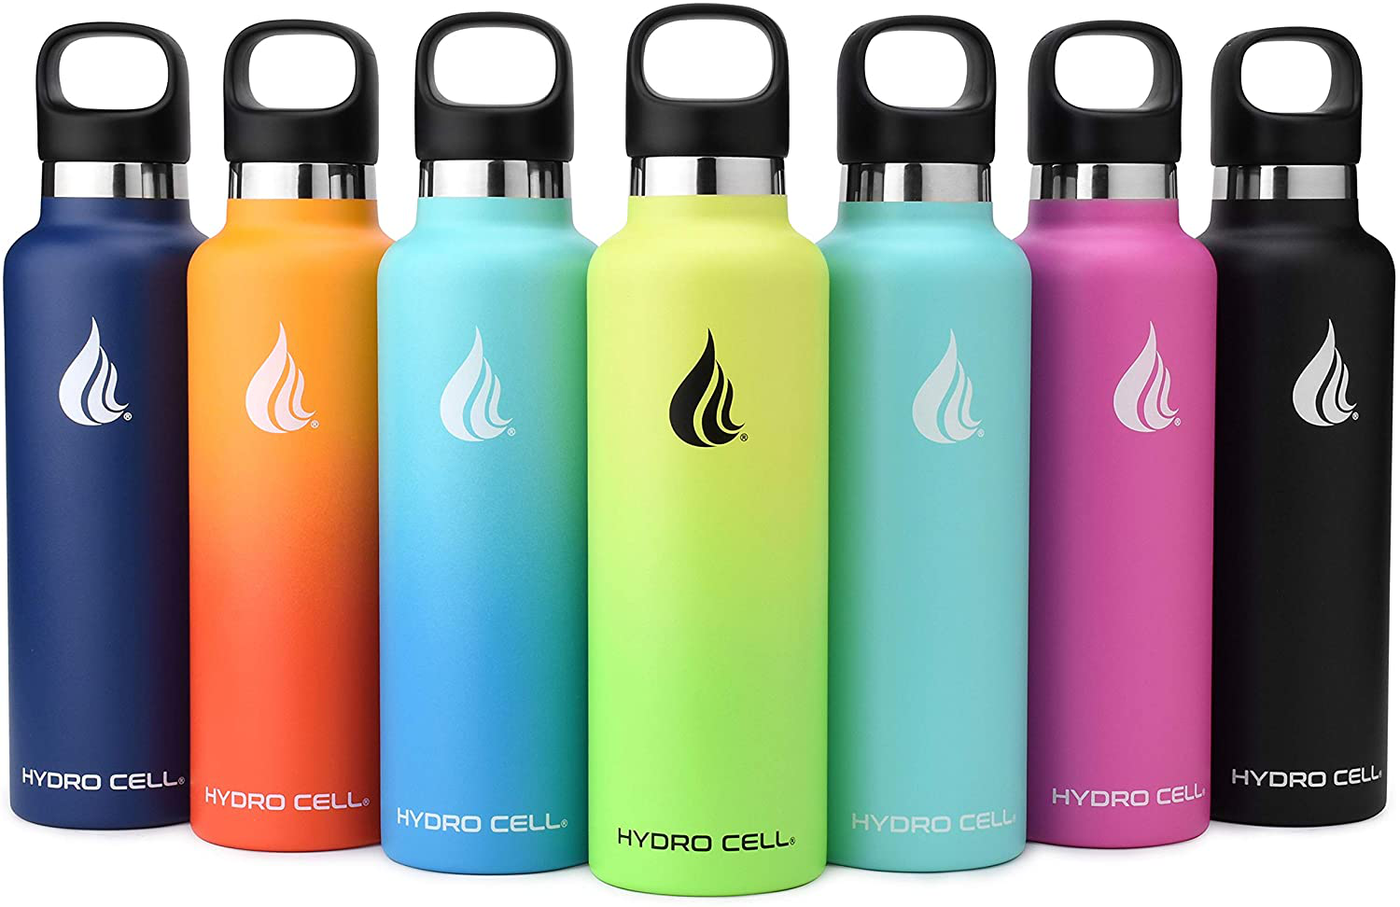 Hydro Cell Stainless Steel Water Bottle with Straw & Standard Mouth Lids (32oz 24oz 20oz 16oz) - Keeps Liquids Hot or Cold with Double Wall Vacuum Insulated Sweat Proof Sport Design (Fuchsia 32oz)